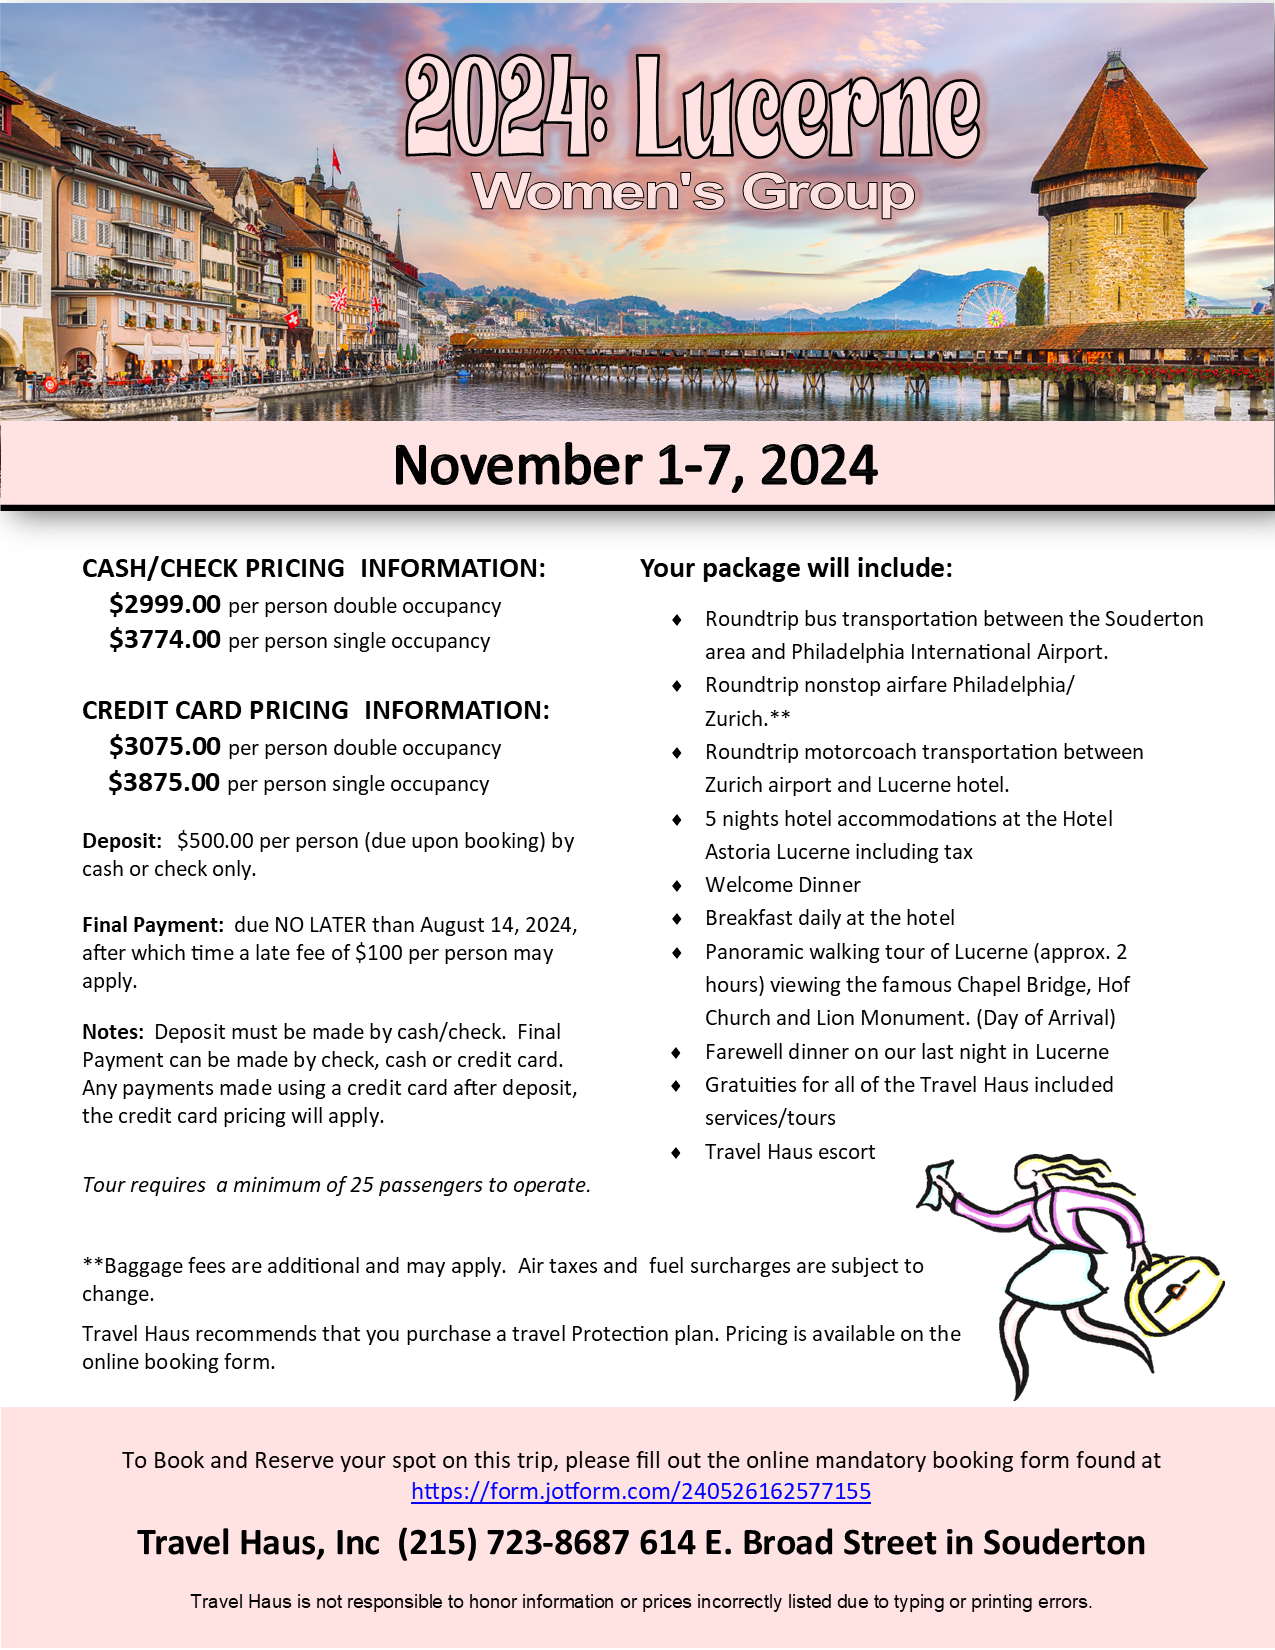 A flyer for a trip to lucerne in november 1-7 , 2024.